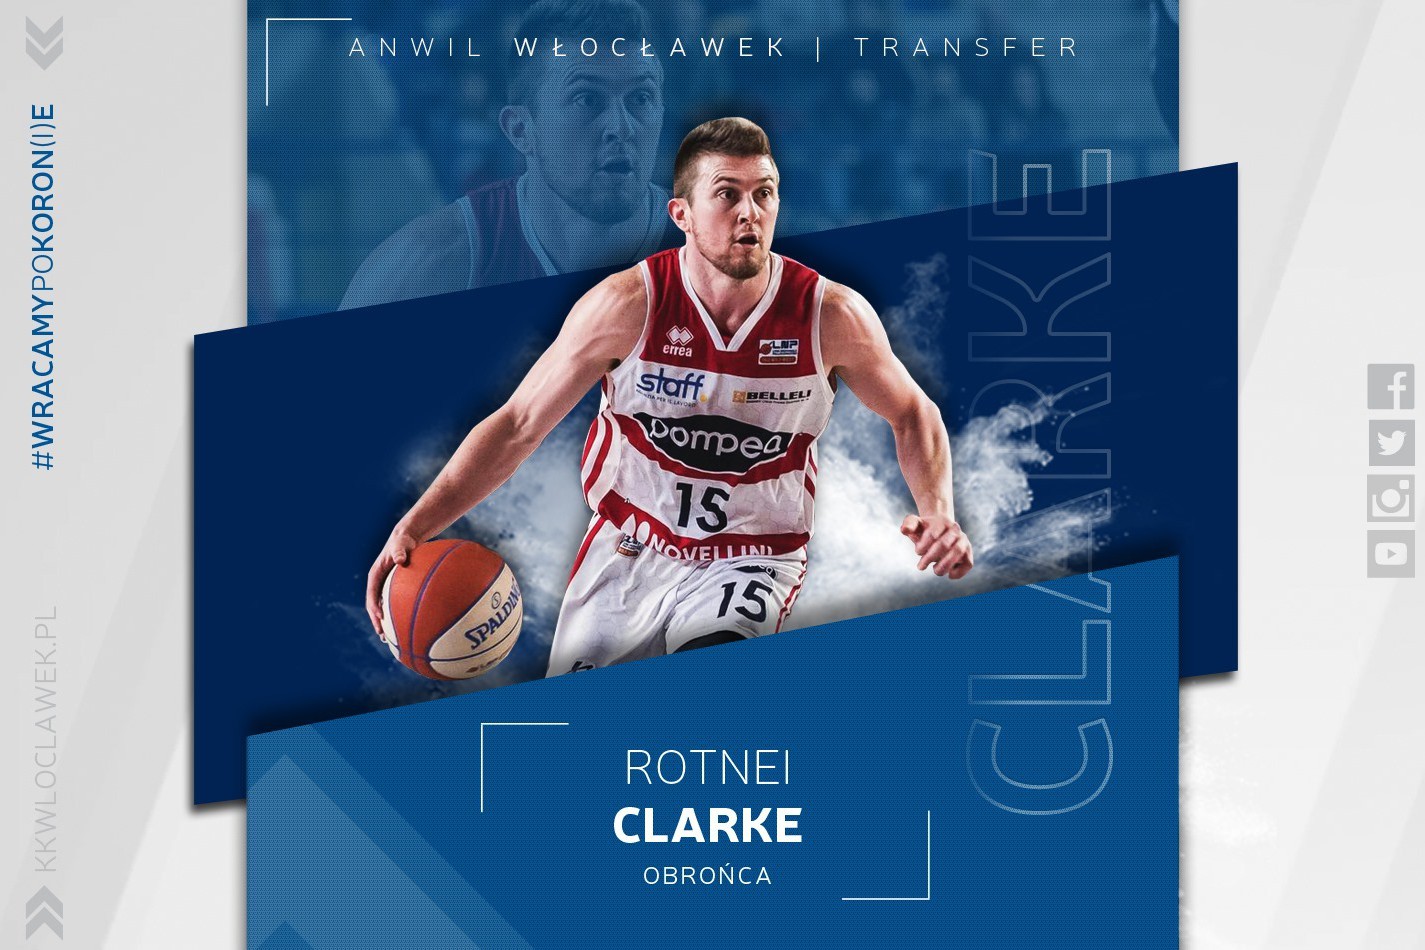 From The Italian Land To Poland - Rotnei Clarke In Anwil